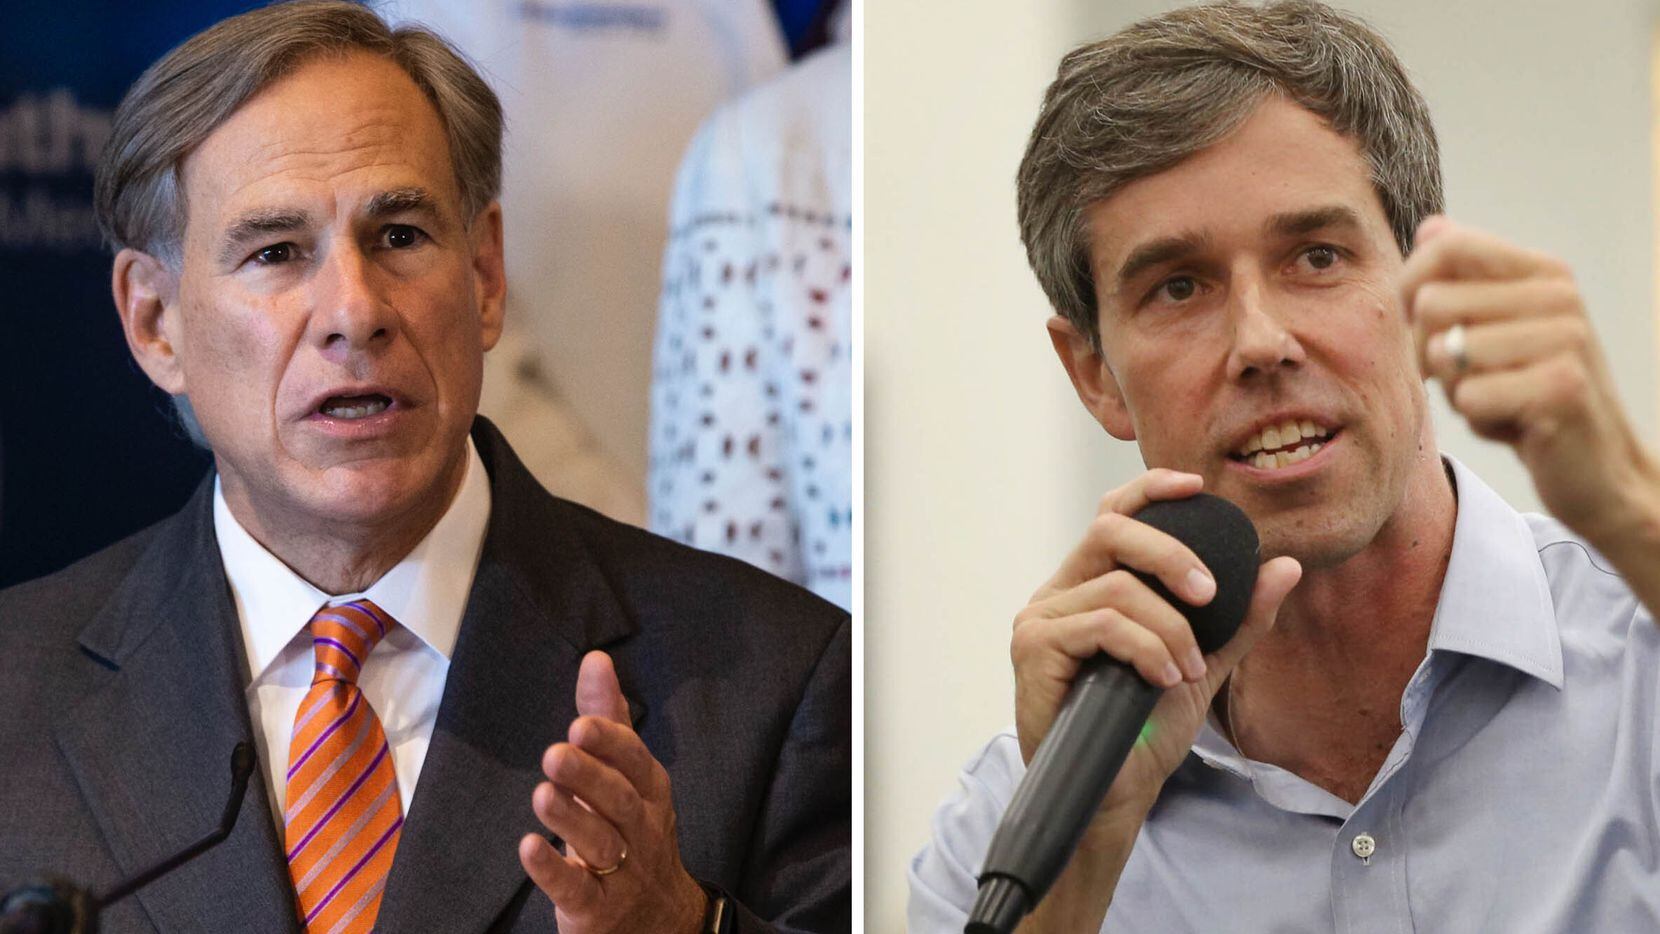 Democrat Beto O’Rourke is considering running for governor against two-time Republican incumbent Greg Abbott. O’Rourke, a former congressman from El Paso, was a 2020 presidential candidate and in 2018 he lost a Senate race to incumbent Republican Ted Cruz by 2.6 percentage points. (Photos by Lynda M. Gonzalez, left, and Rose Baca, right)